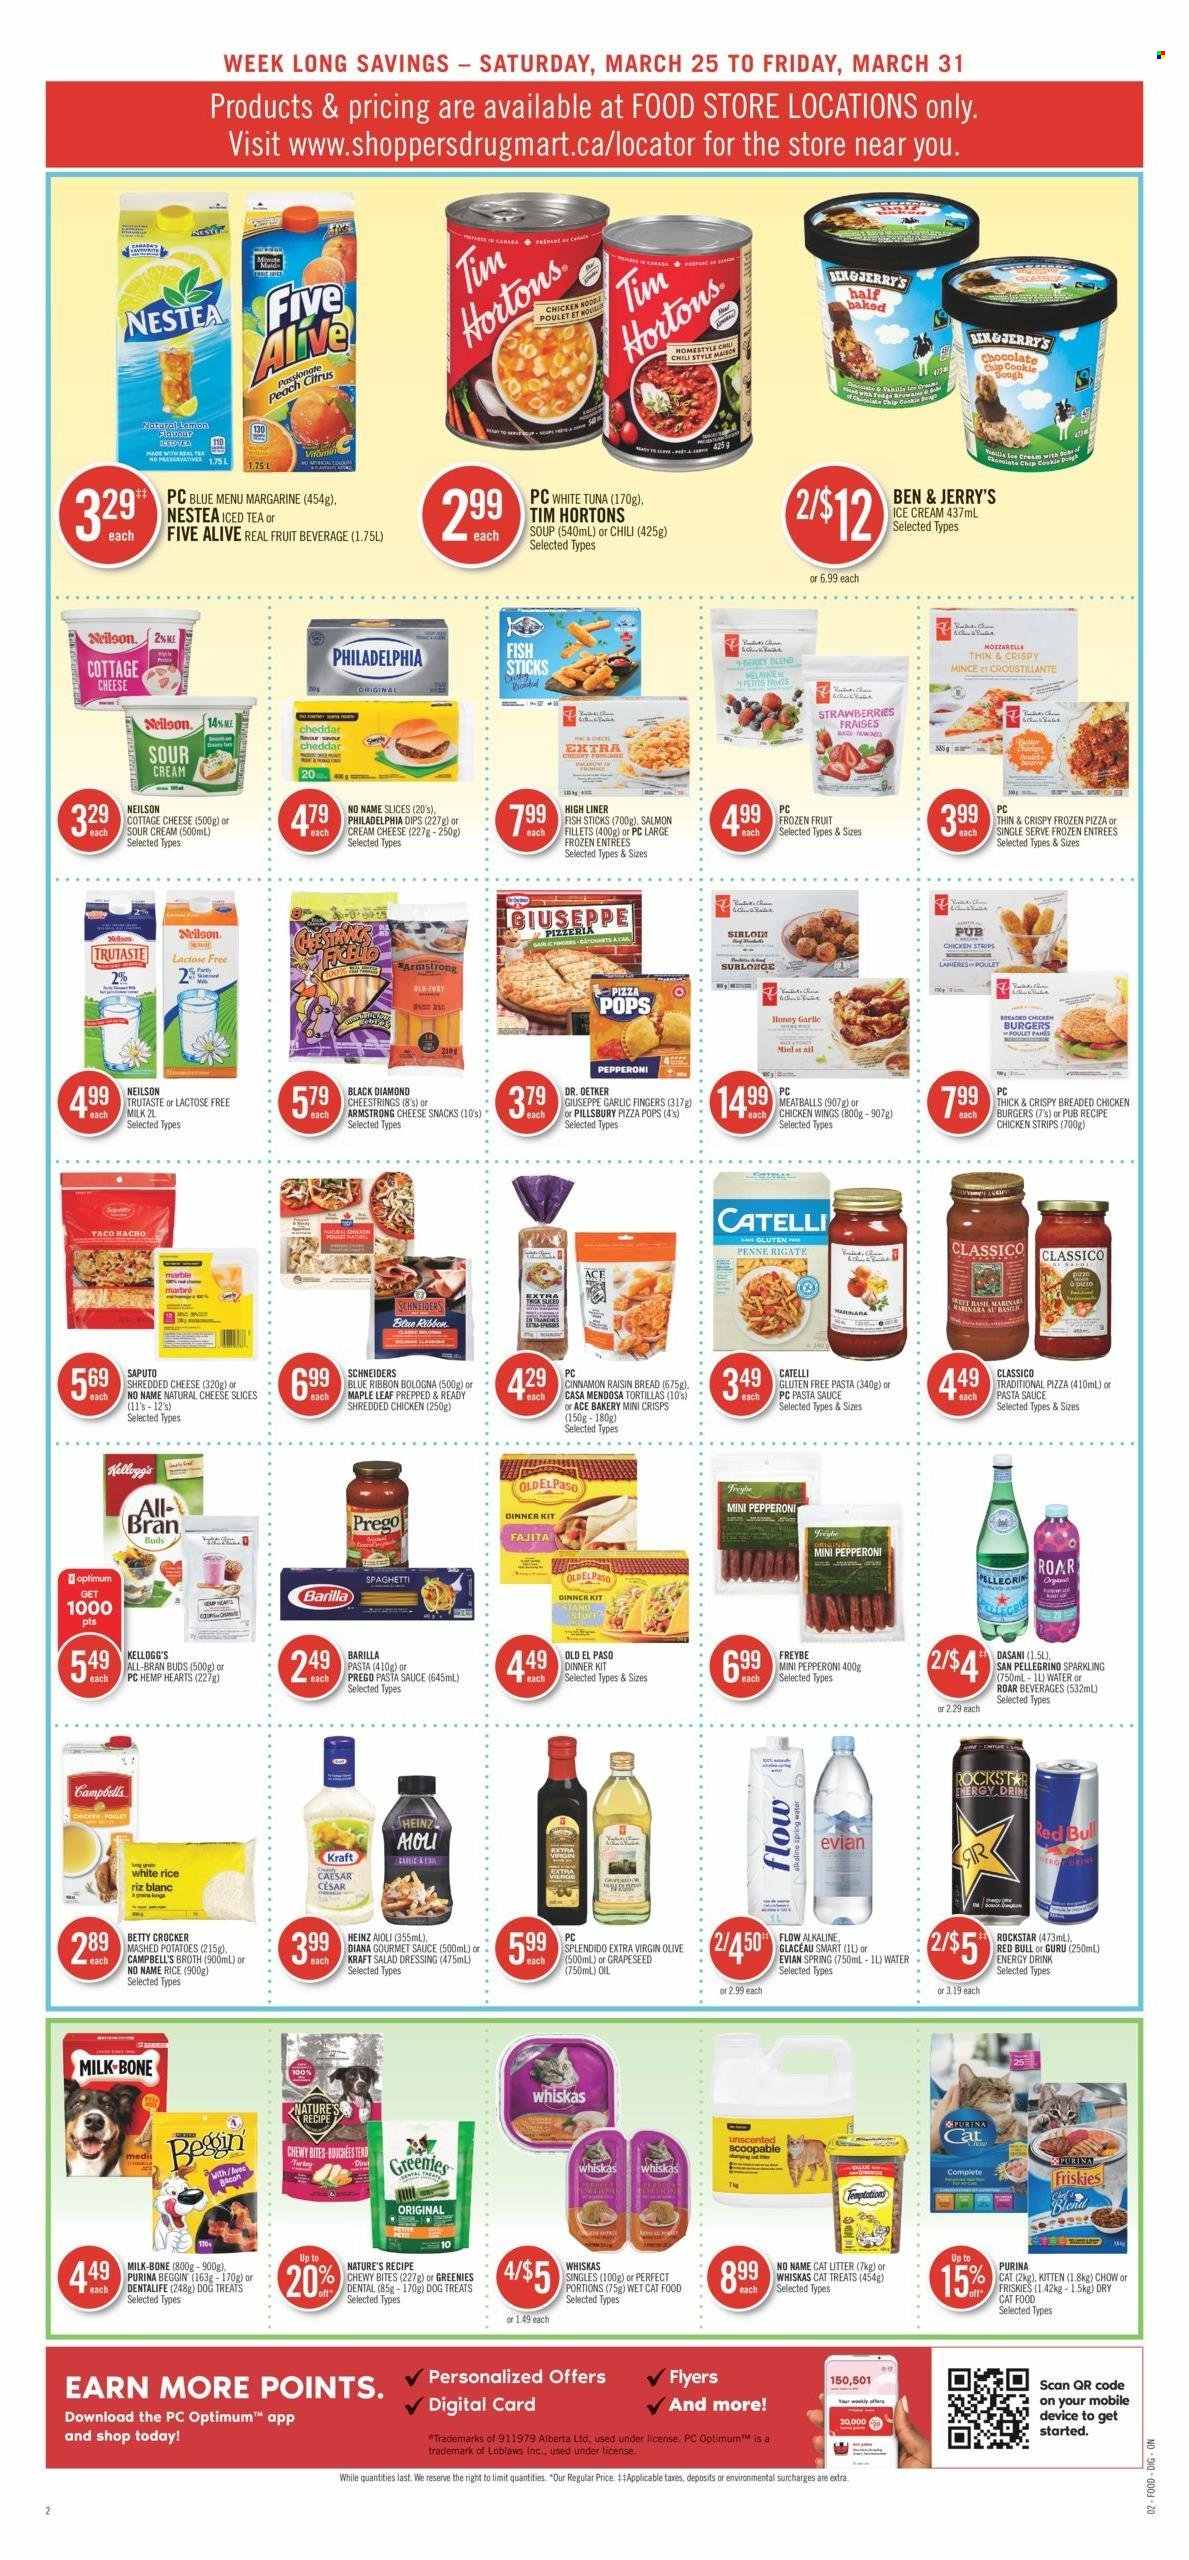 thumbnail - Shoppers Drug Mart Flyer - March 25, 2023 - March 31, 2023 - Sales products - bread, tortillas, Old El Paso, ACE Bakery, salmon fillet, fish, fish fingers, No Name, fish sticks, Campbell's, mashed potatoes, spaghetti, pizza, pasta sauce, meatballs, soup, hamburger, fried chicken, Pillsbury, dinner kit, fajita, Kraft®, bologna sausage, cottage cheese, shredded cheese, sliced cheese, string cheese, cheddar, Dr. Oetker, milk, margarine, sour cream, ice cream, Ben & Jerry's, chocolate chips, snack, Kellogg's, broth, garlic, strawberries, All-Bran, white rice, penne, salad dressing, dressing, Classico, extra virgin olive oil, energy drink, ice tea, Red Bull, Rockstar, Evian, San Pellegrino, water, pants, animal food, cat food, Purina, Optimum, Dentalife, Greenies, dry cat food, Friskies, wet cat food, Heinz, Philadelphia, Whiskas, Barilla. Page 5.